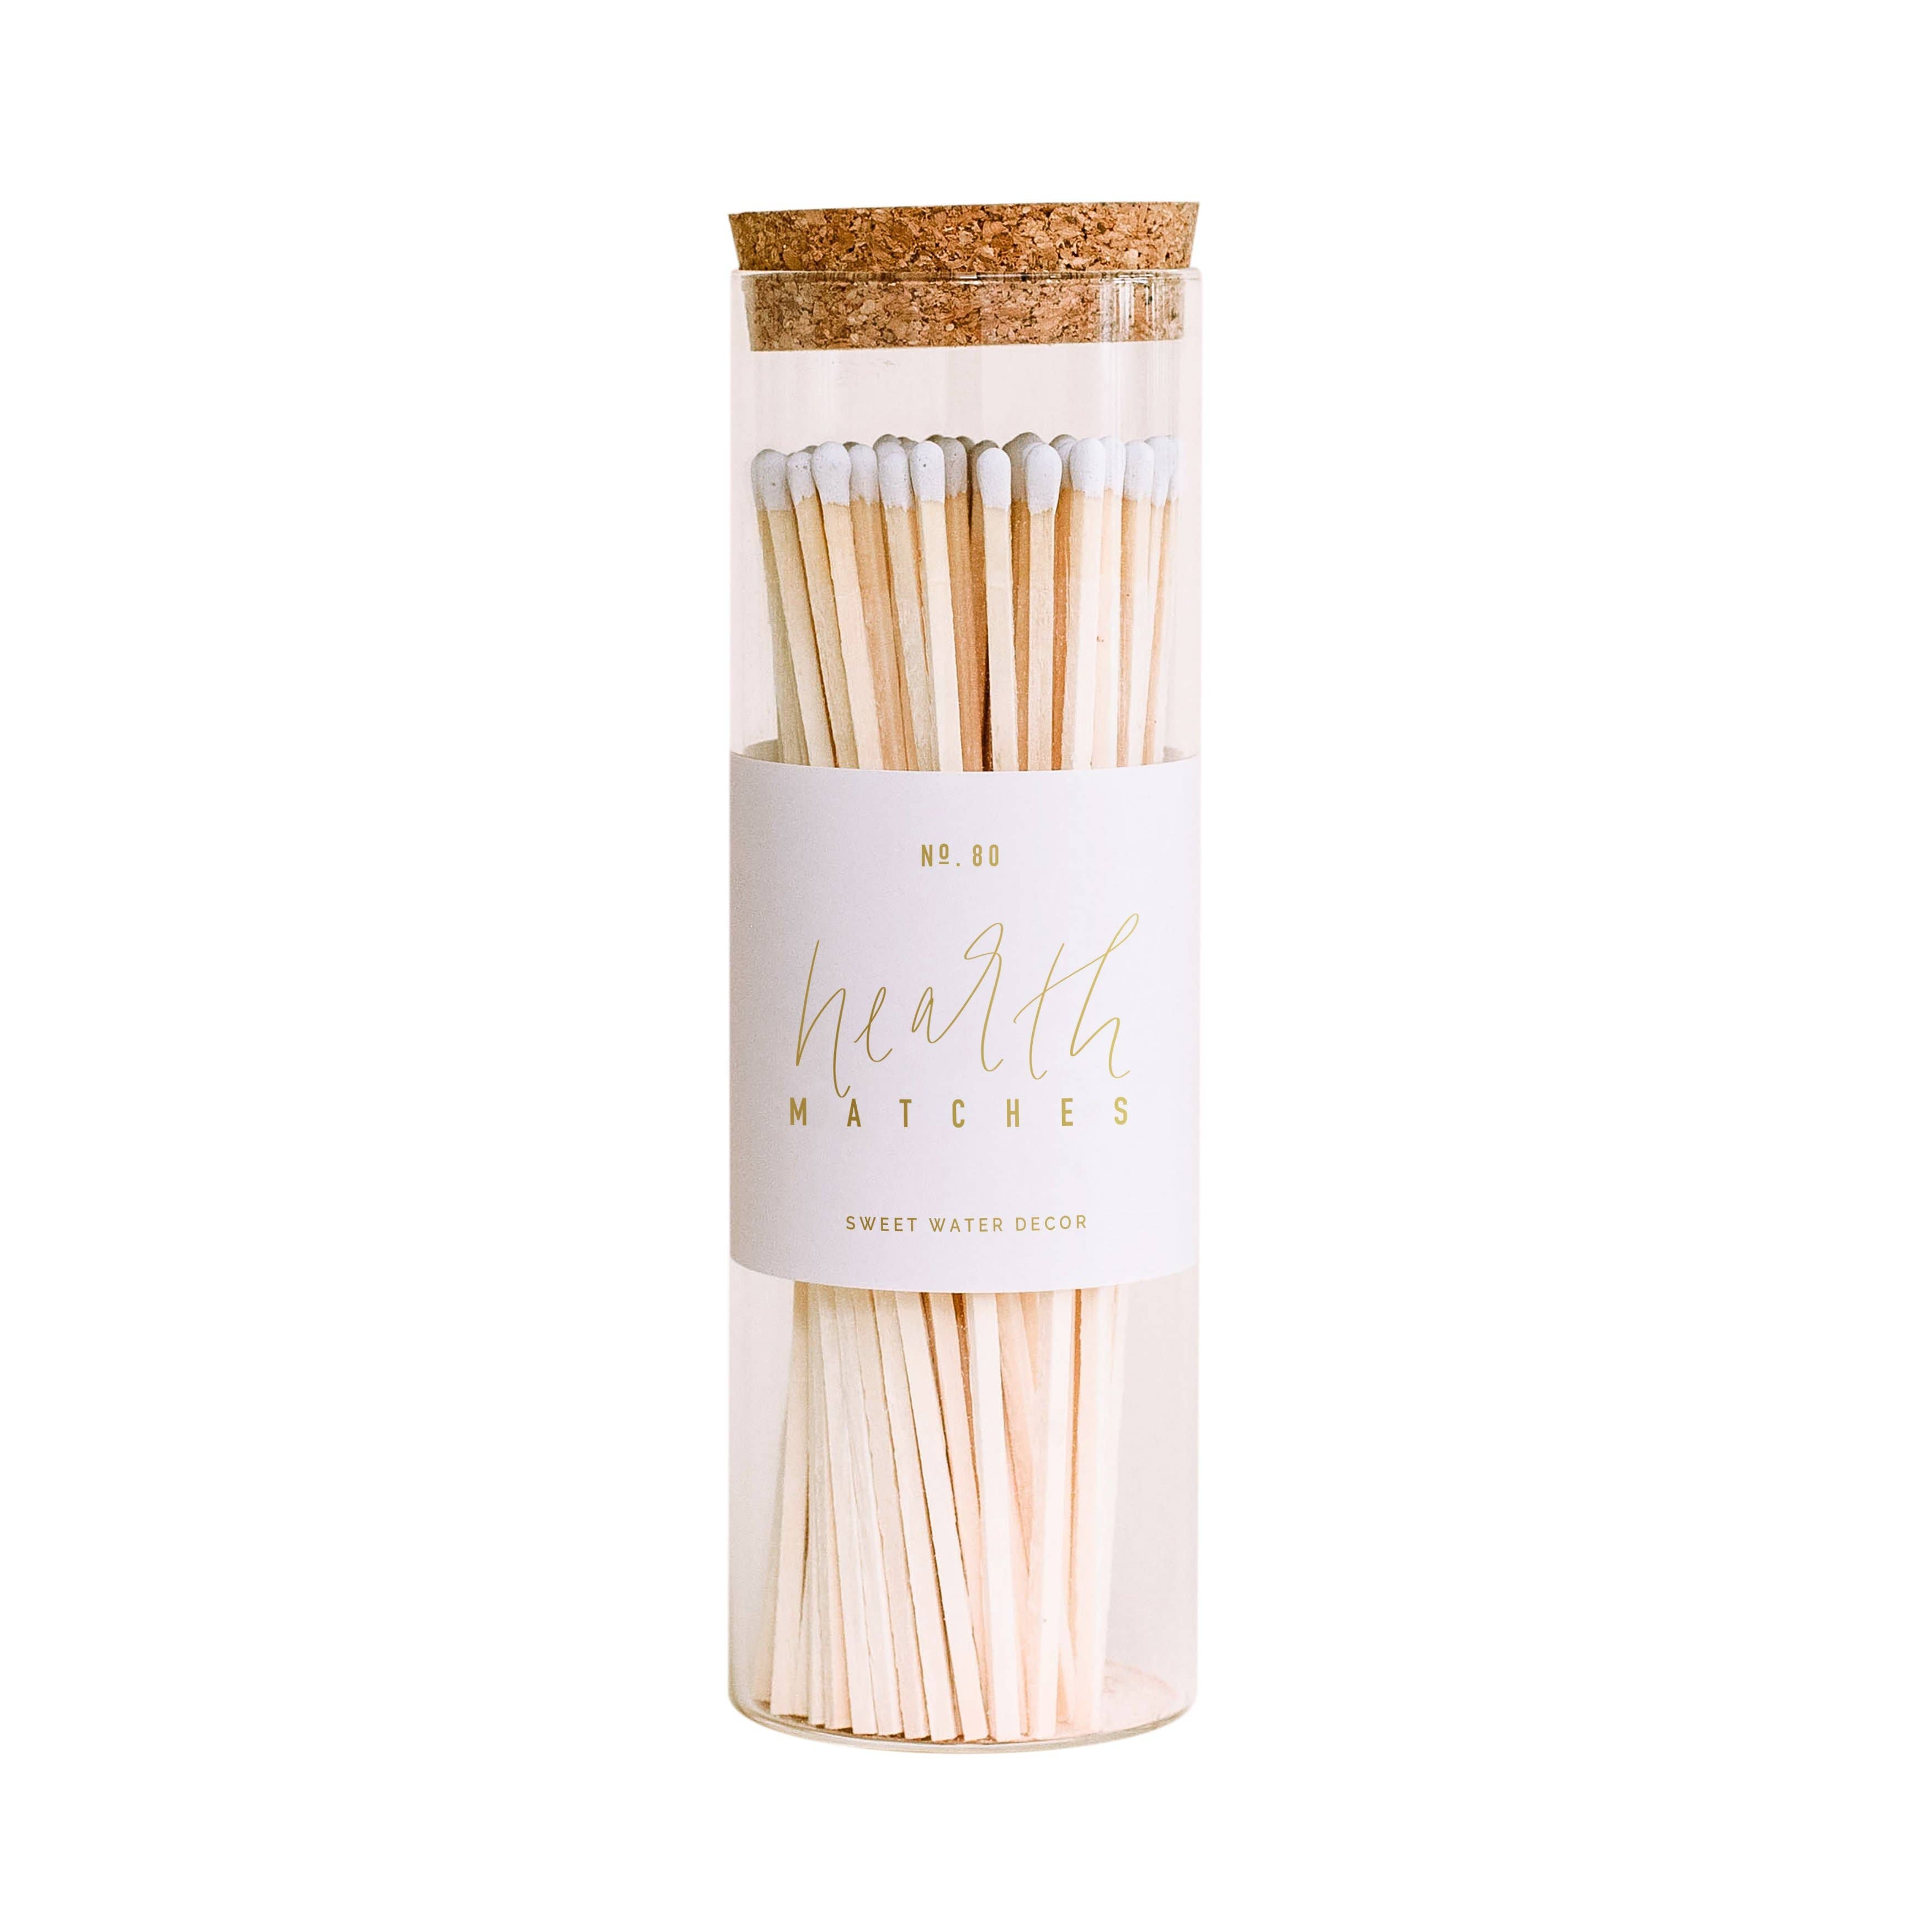 Hearth Matches, White Tip - Home Decor & Gifts